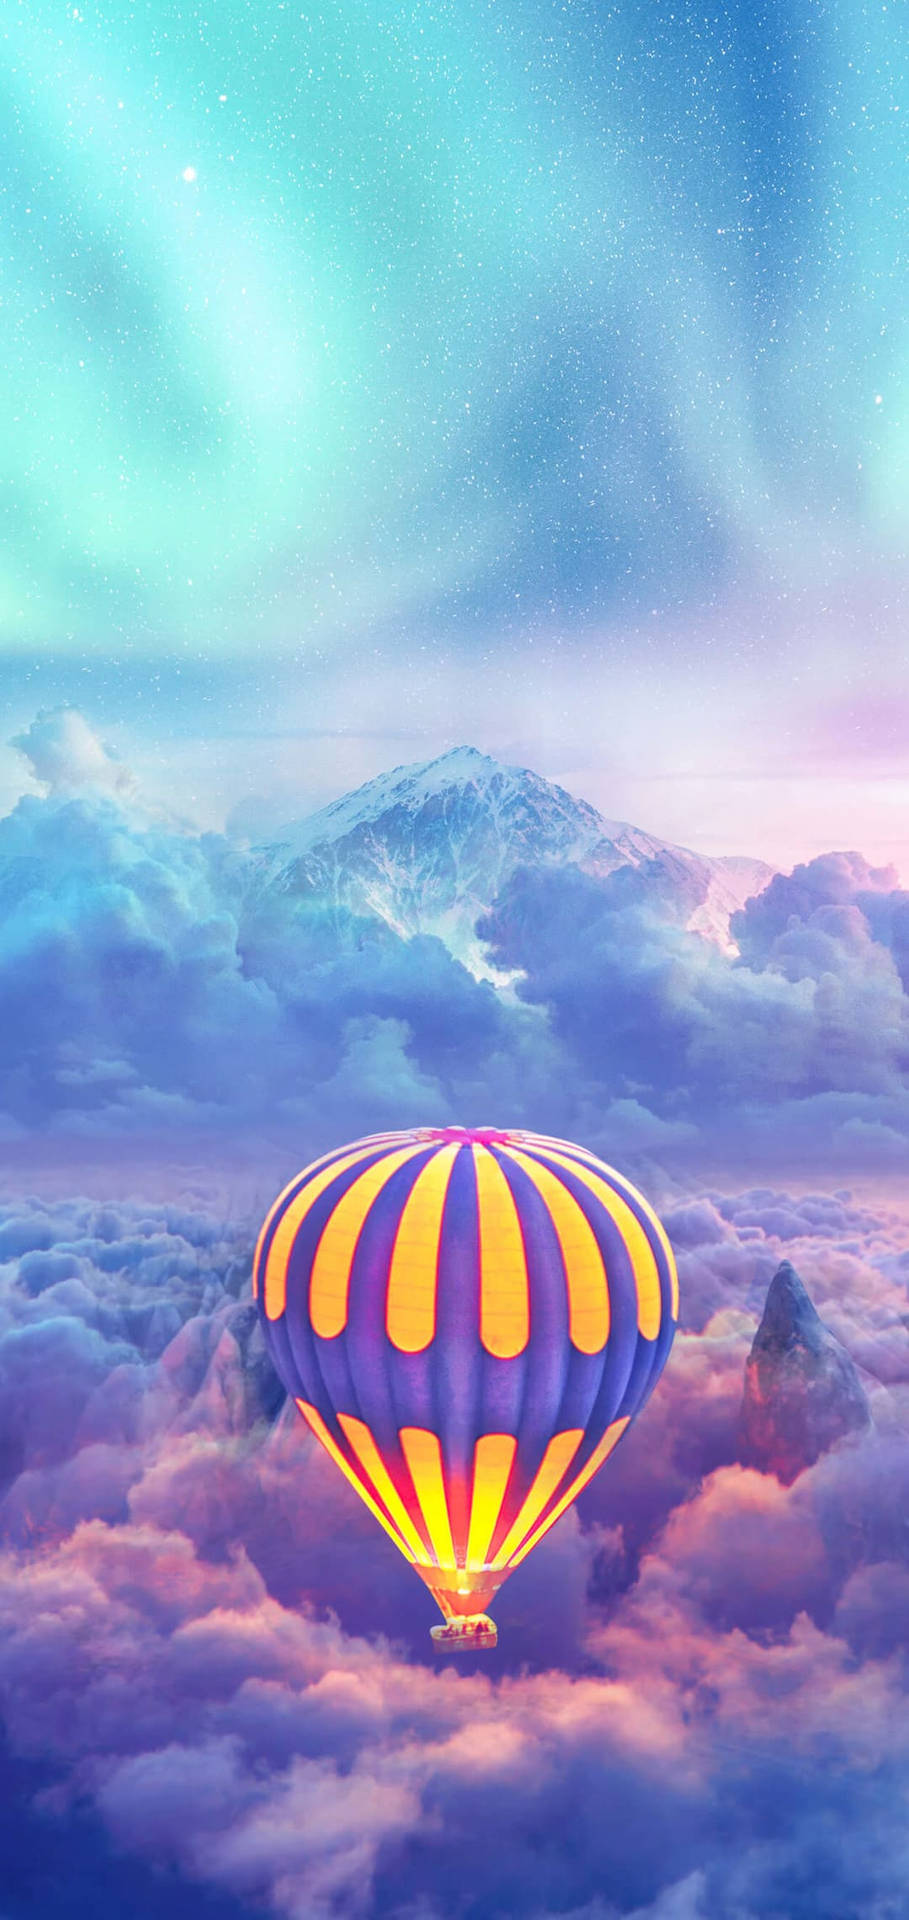 Coolest Parachute On Aesthetic Clouds Wallpaper